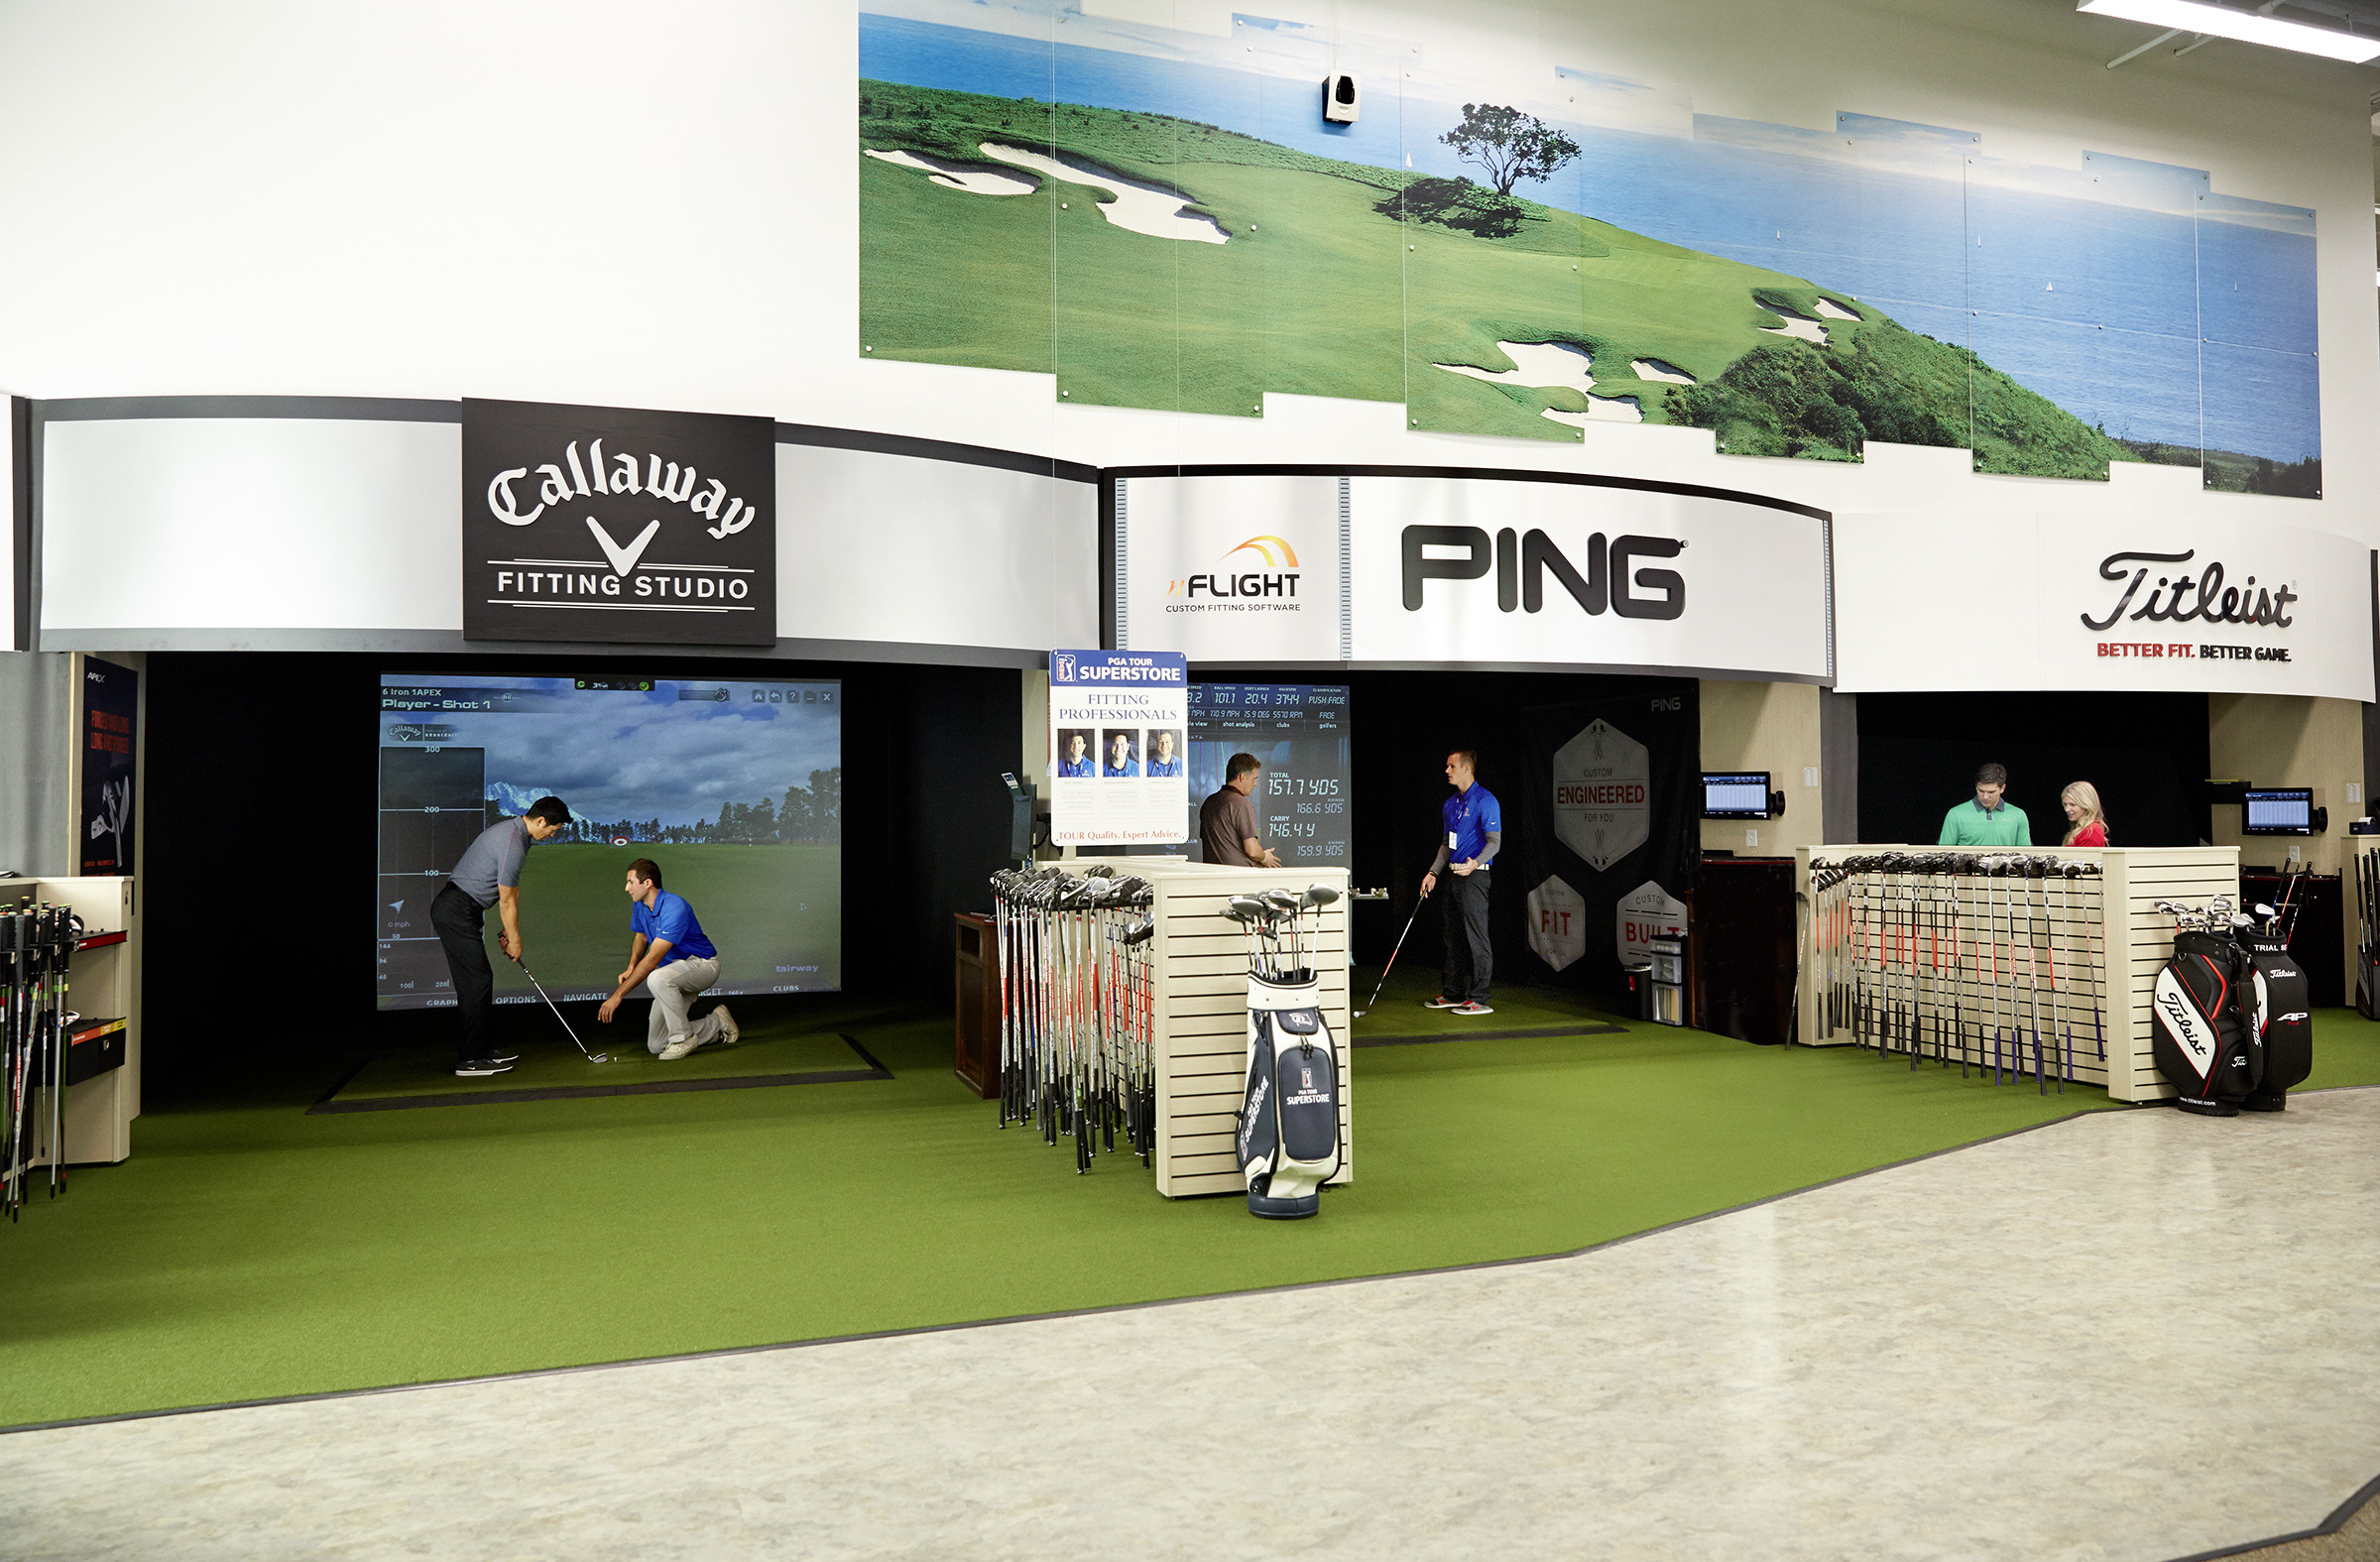 What’s working so well for PGA Tour Superstore? CEO Dick Sullivan